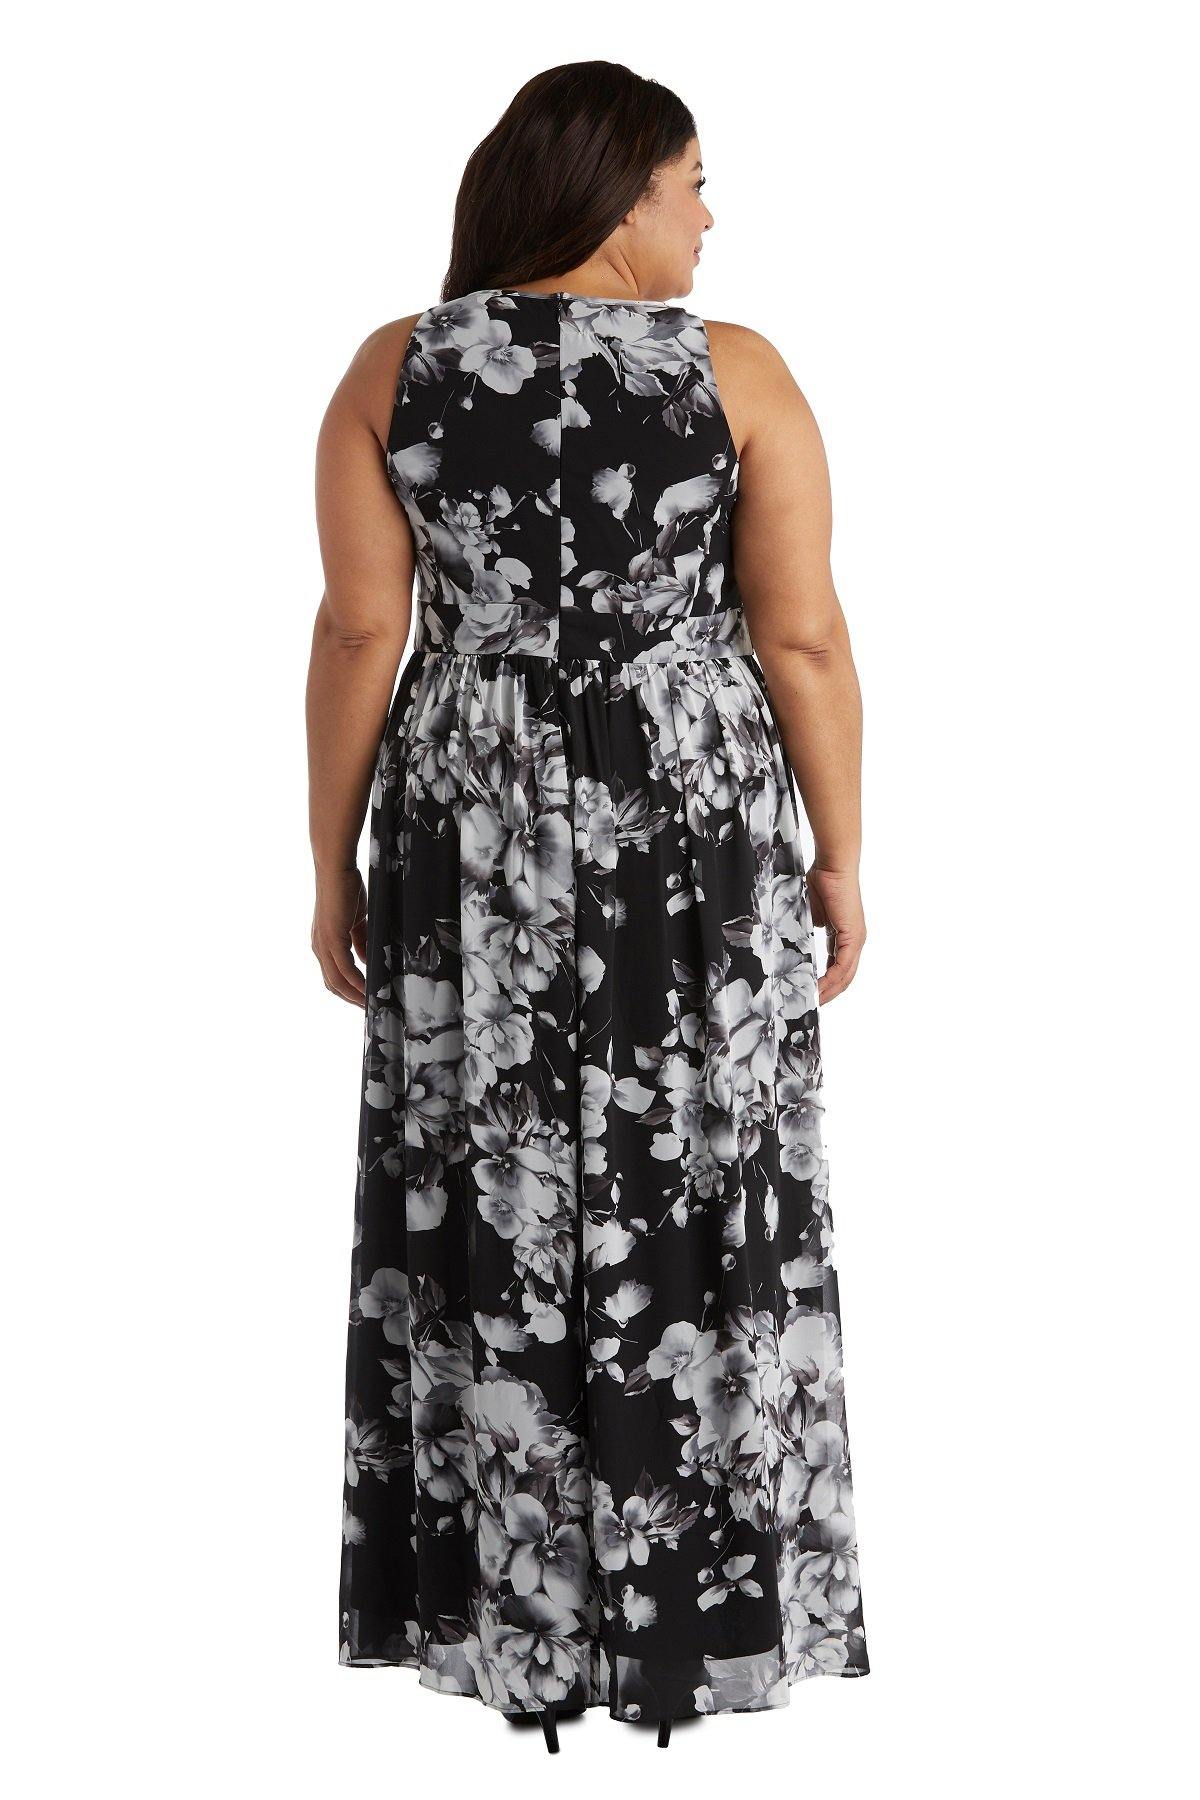 R&M Richards Long Formal Print Plus Size Gown 7035W - The Dress Outlet